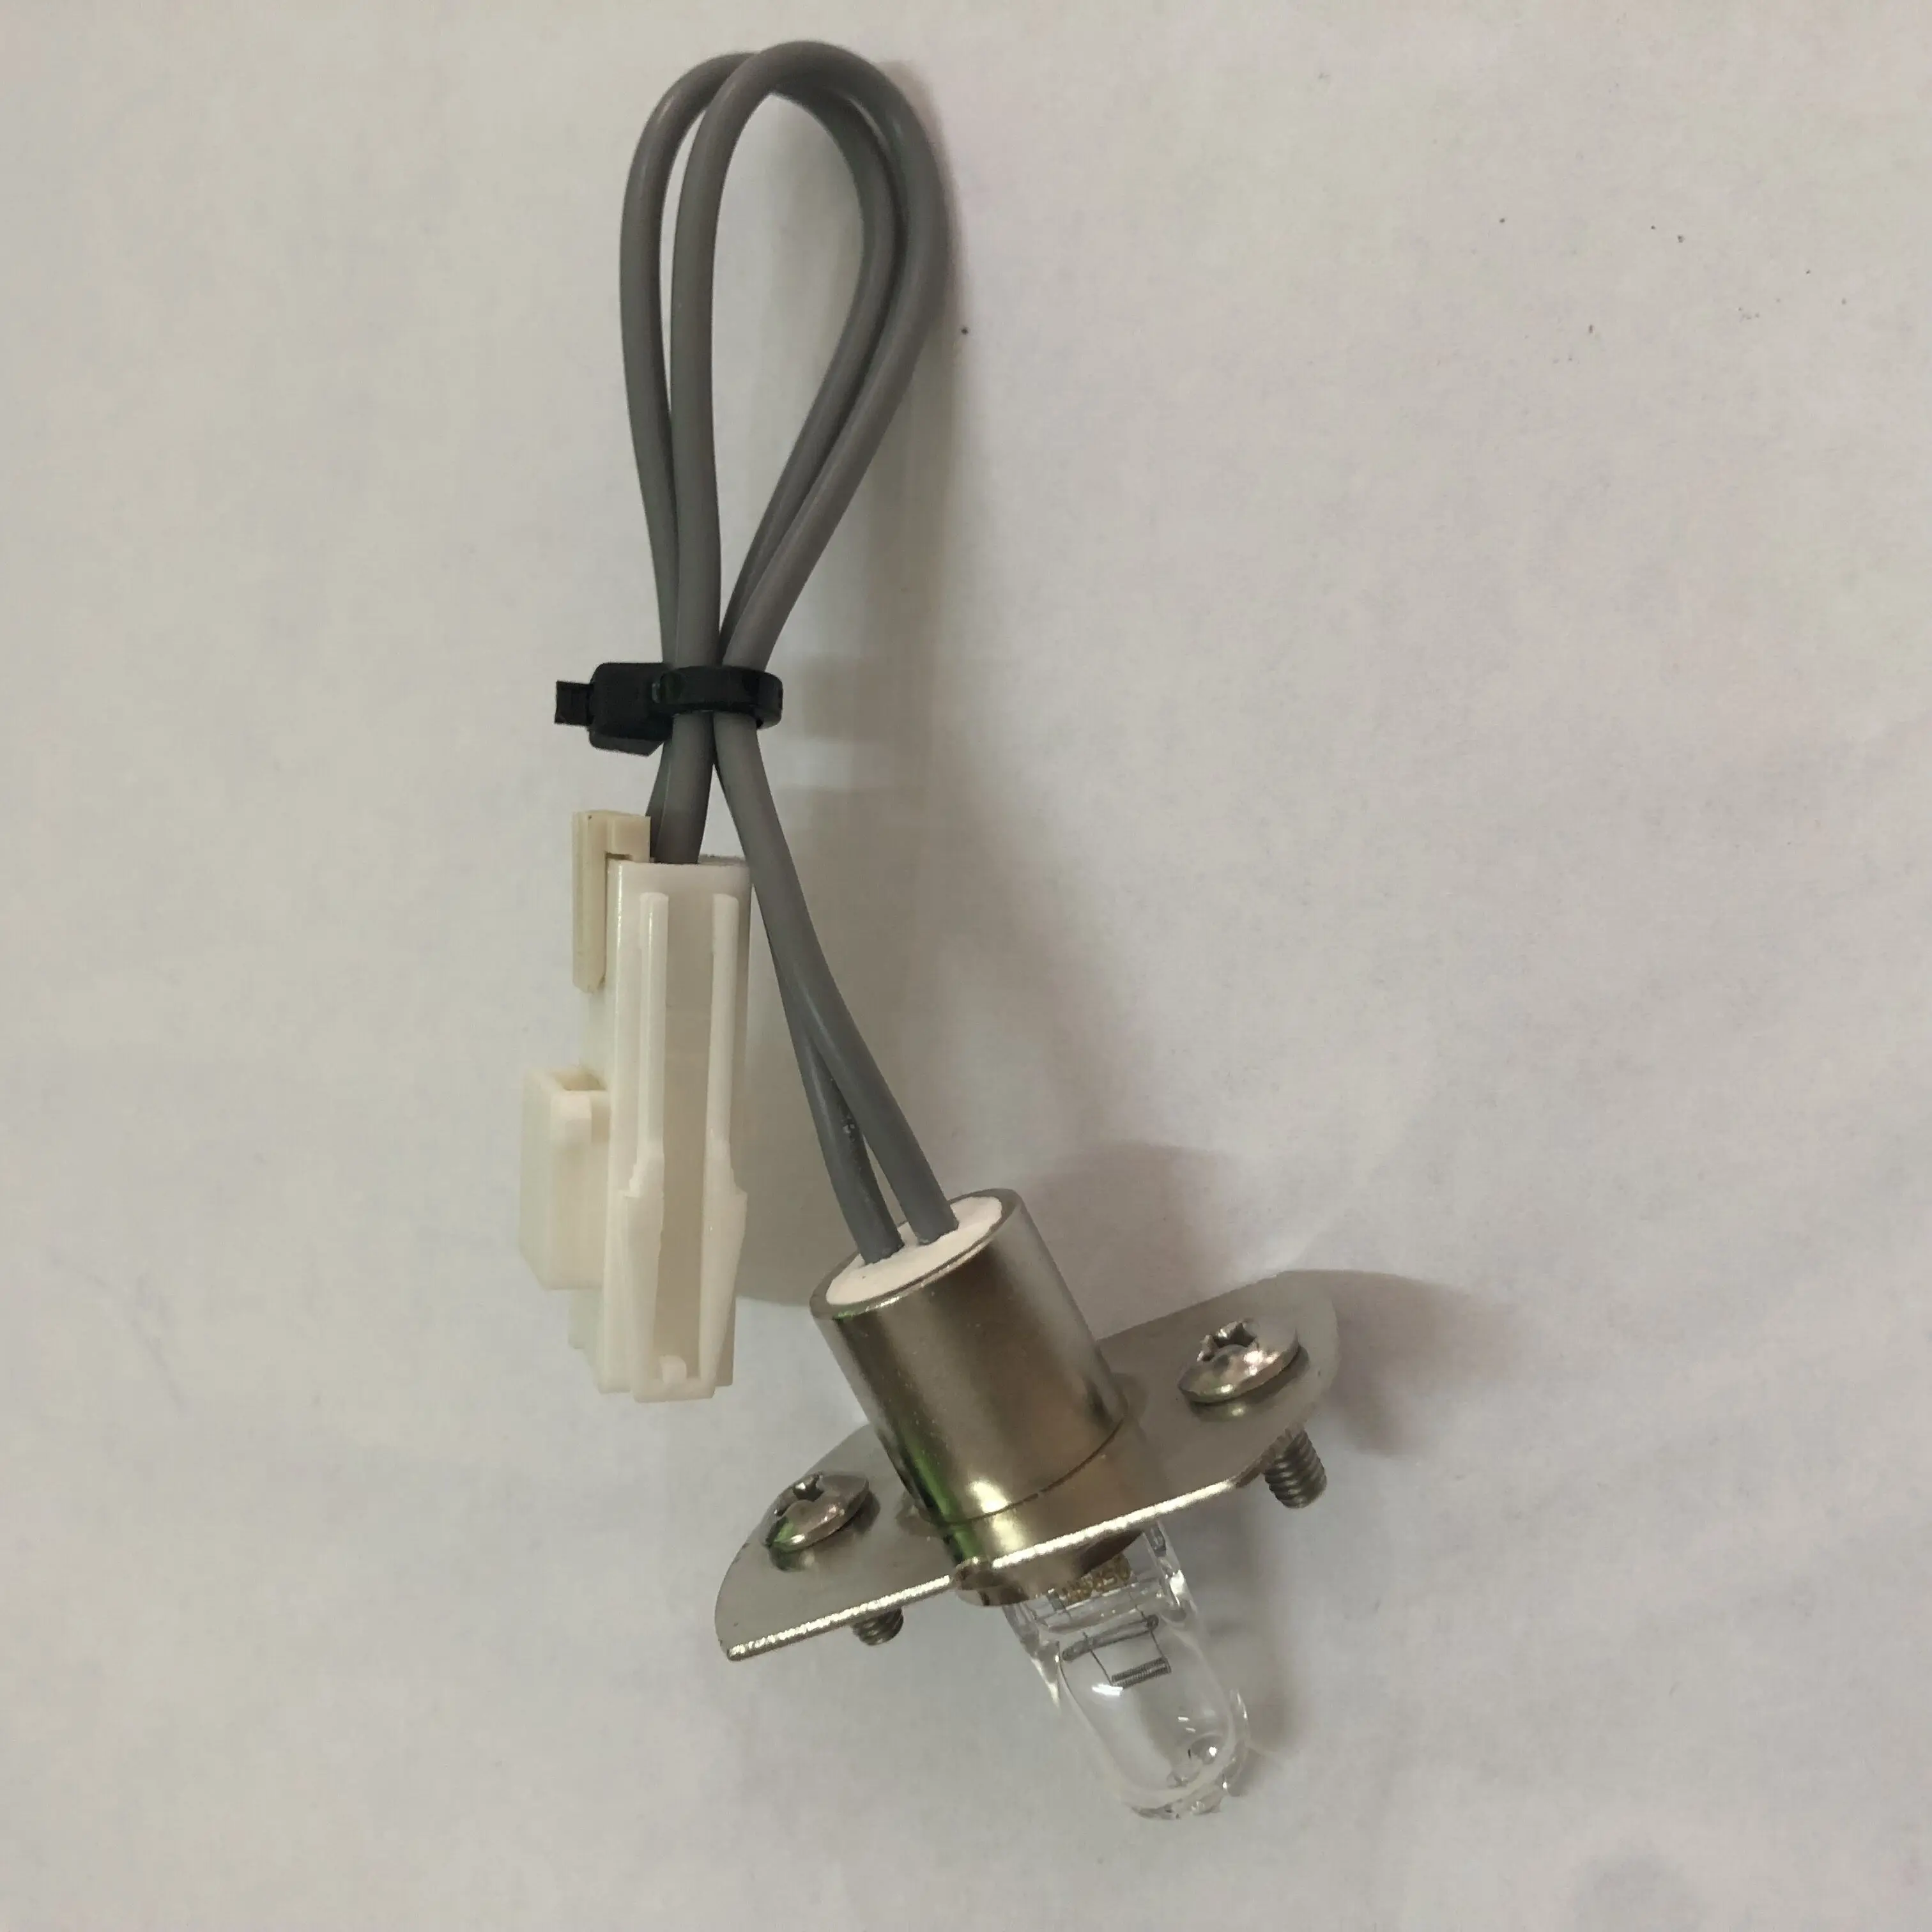 

Compatible lamp used for Sysmex chemix180 C-180 12V20W Furuno halogen lamp CA400, Sysmex CHEM 180